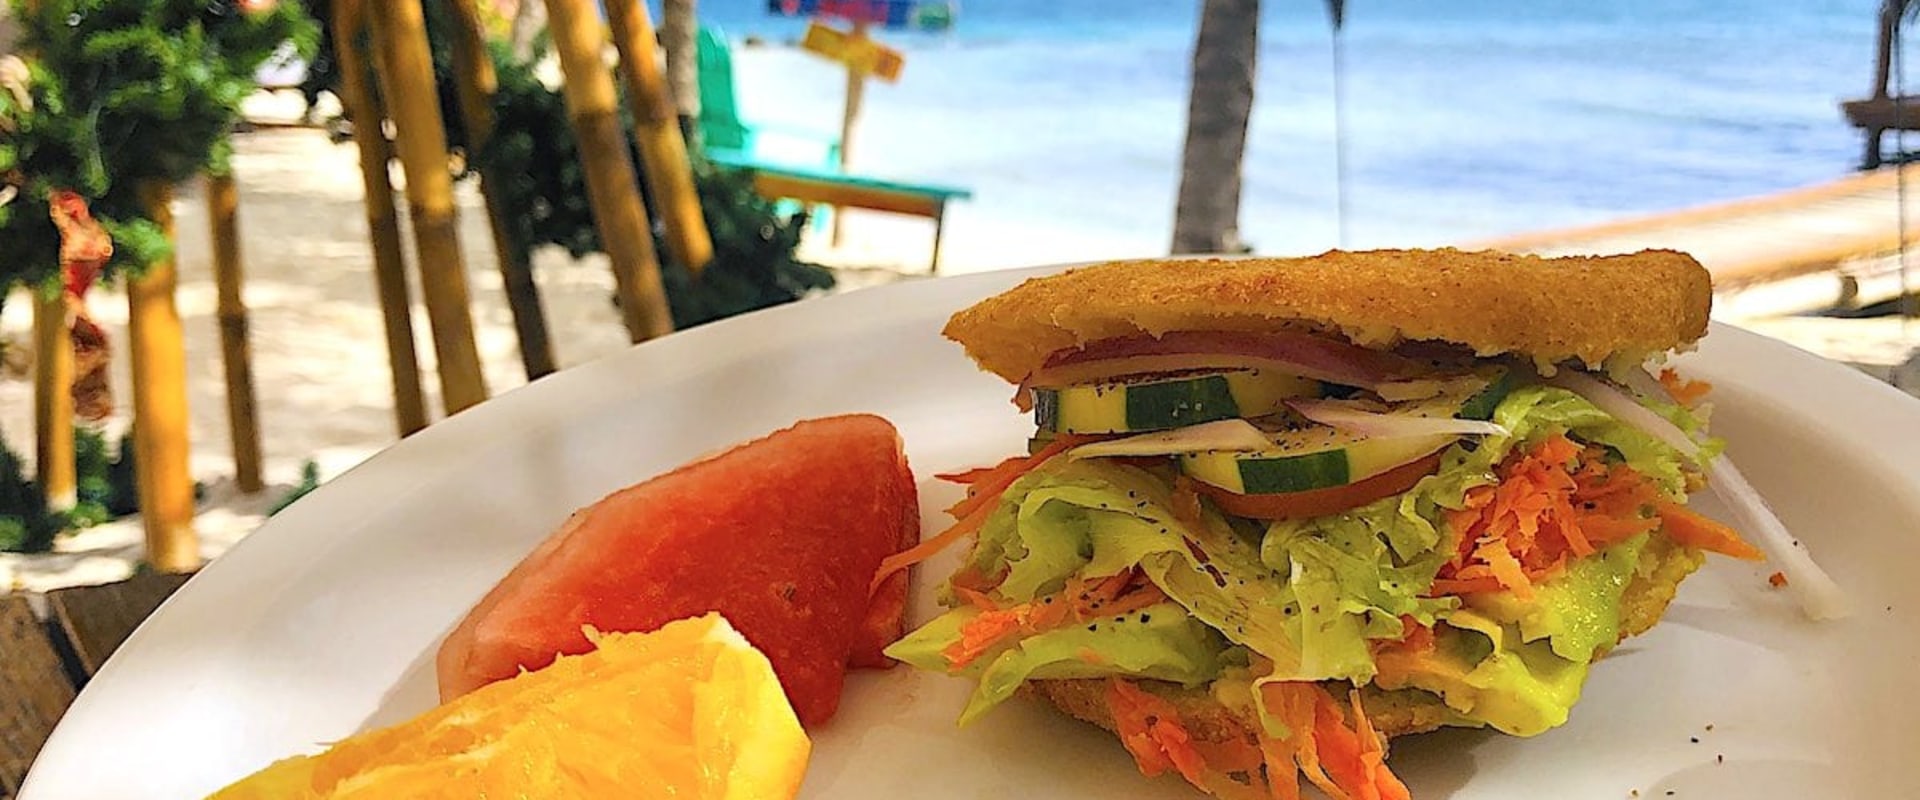 Vegan Delights in Panama City, Florida: A Foodie's Guide